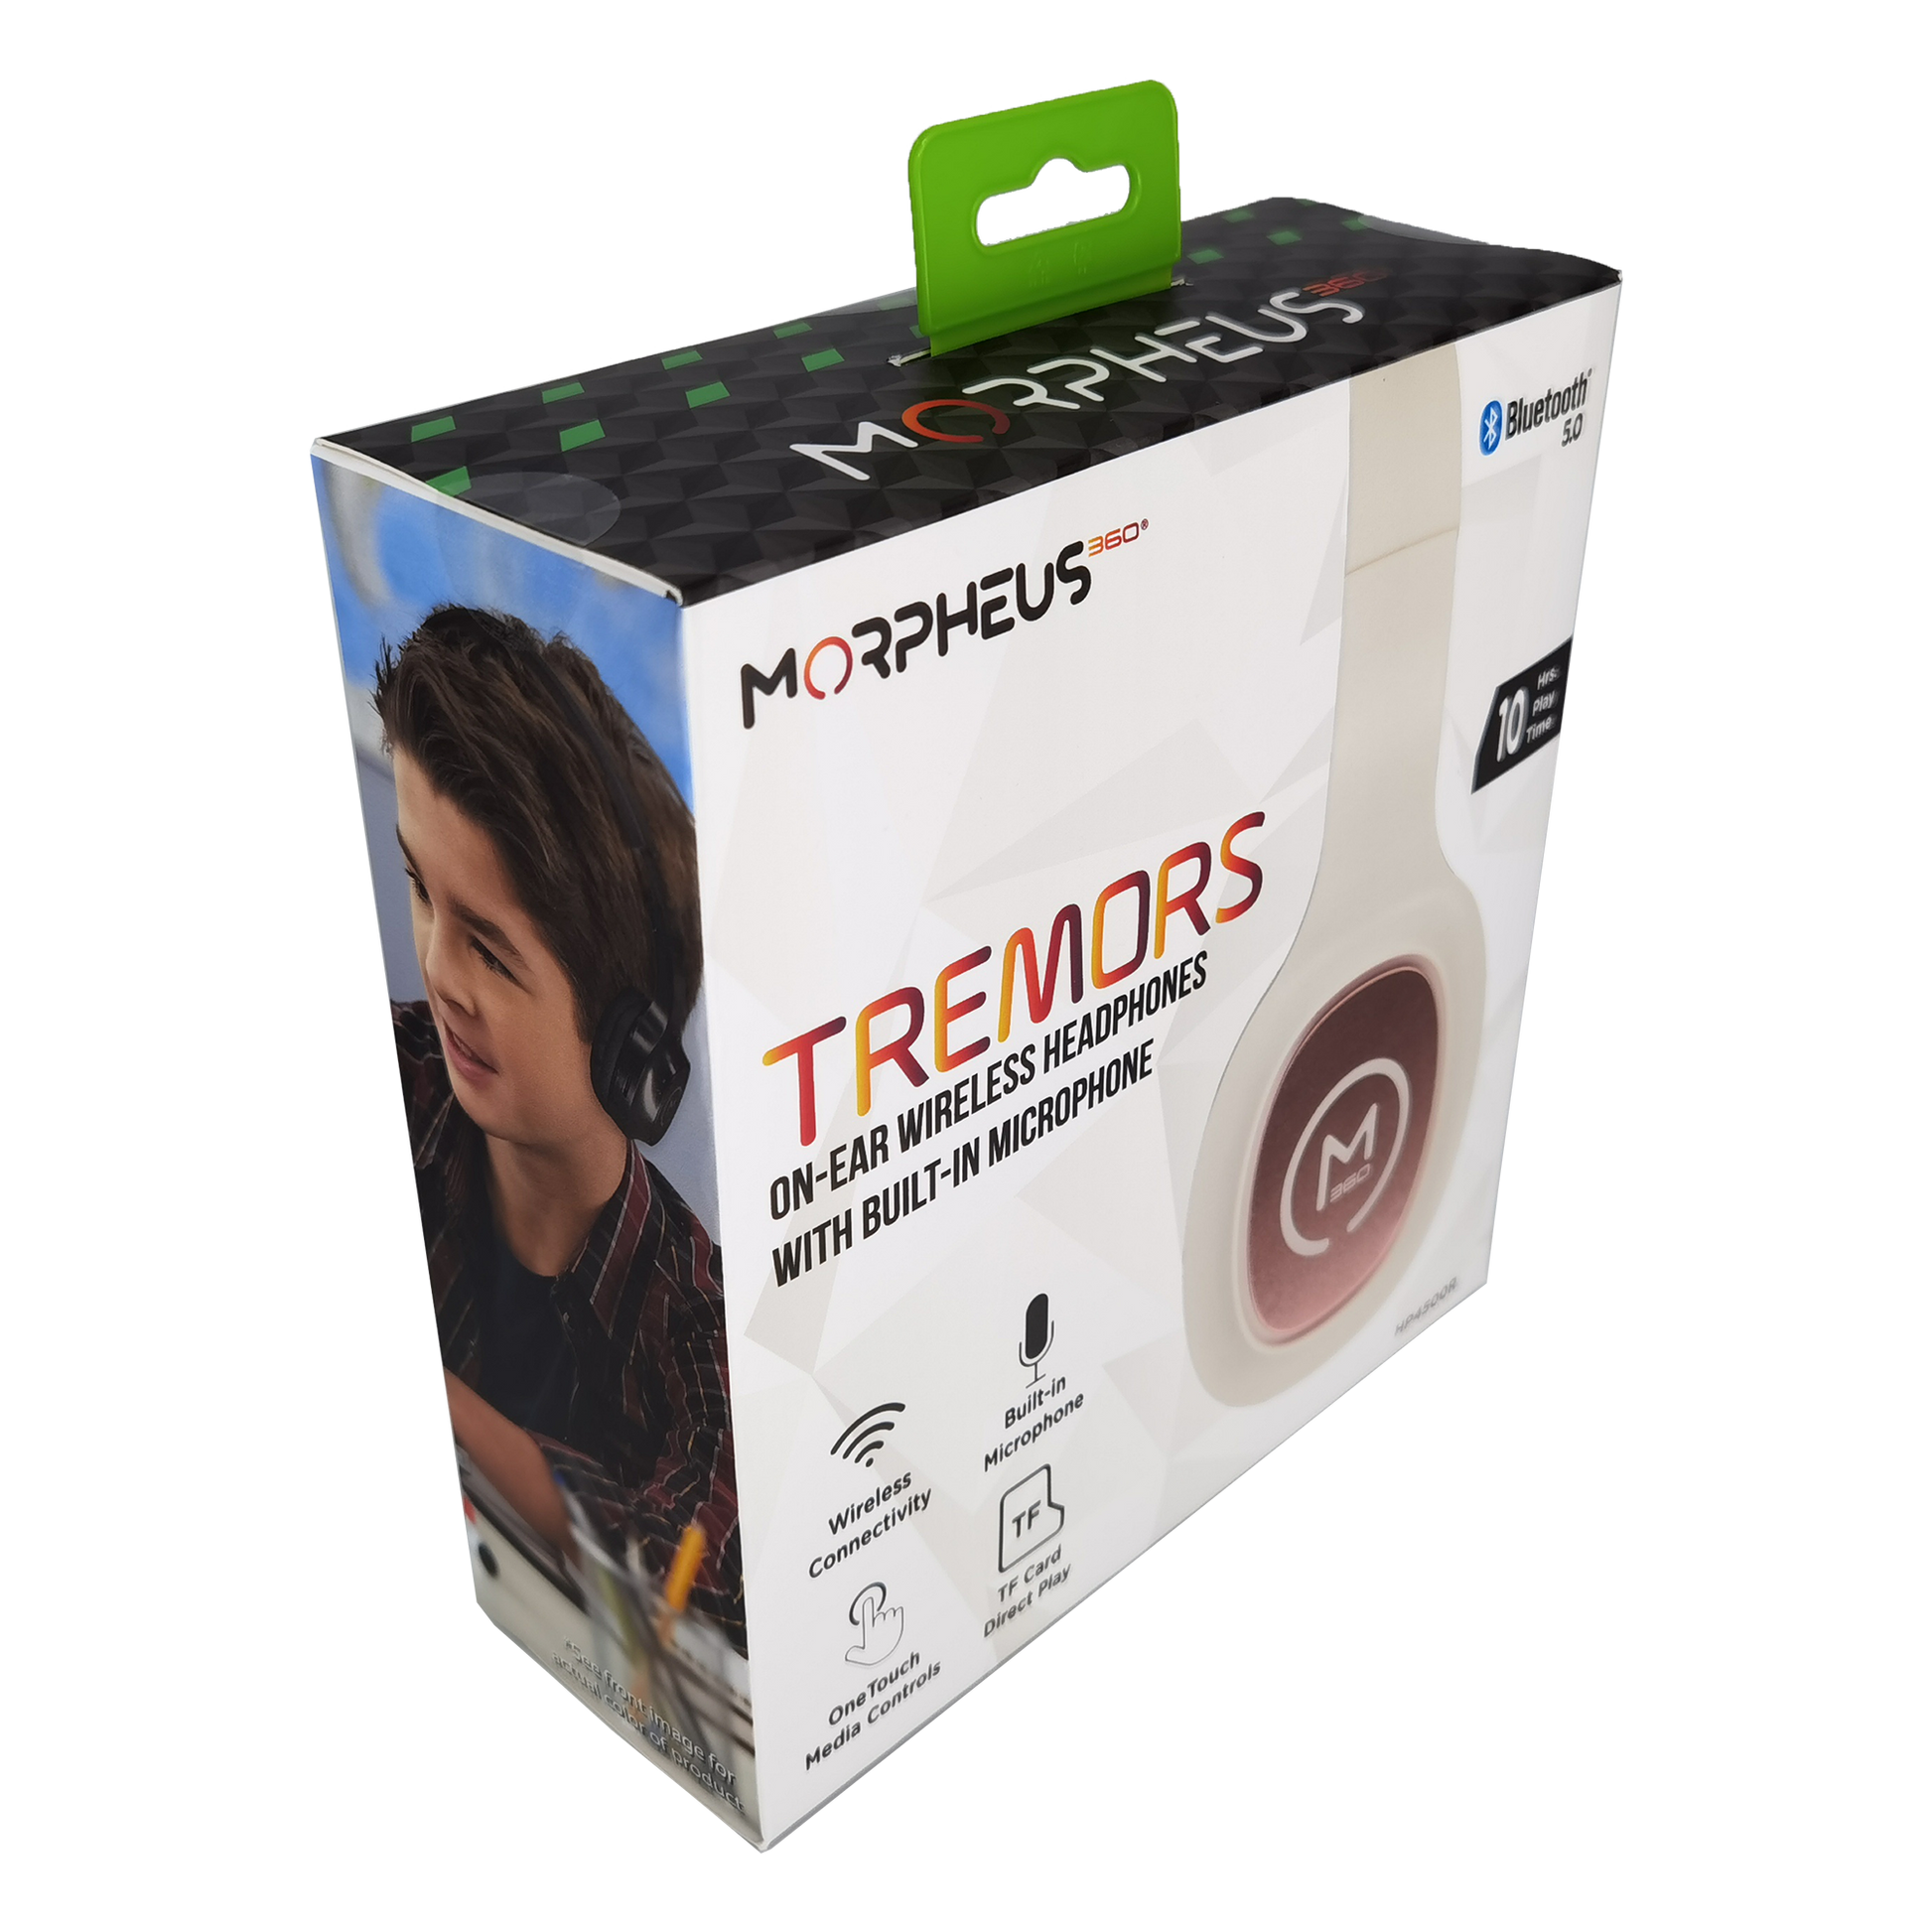 Photo of Morpheus 360 Tremors Wireless on-ear Headphones Retail Packaging displays a side view of the White with Rose Gold accents Tremors headphones, Bluetooth 5.0, 10 Hours of Playtime, Wireless Connectivity, Built-in Microphone, One Touch Media Controls, and TF Card Direct Play features.